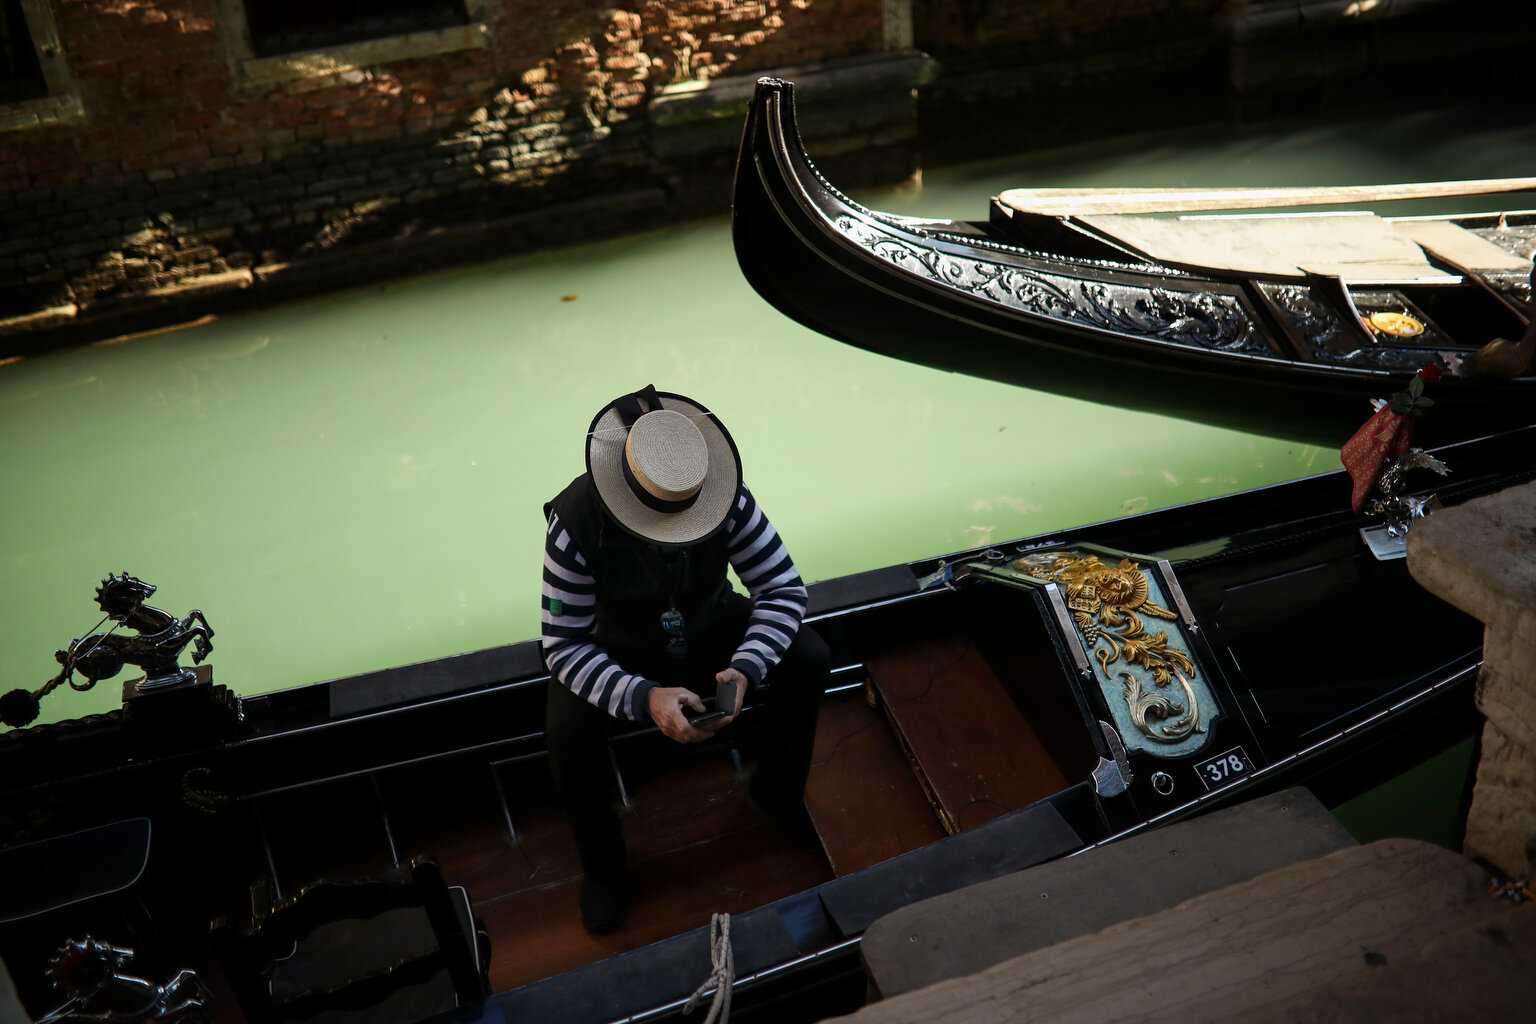  A gondolier looks at his smartphone as he waits for clients in Venice, Italy, Friday, Feb. 28, 2020. (AP Photo/Francisco Seco) 